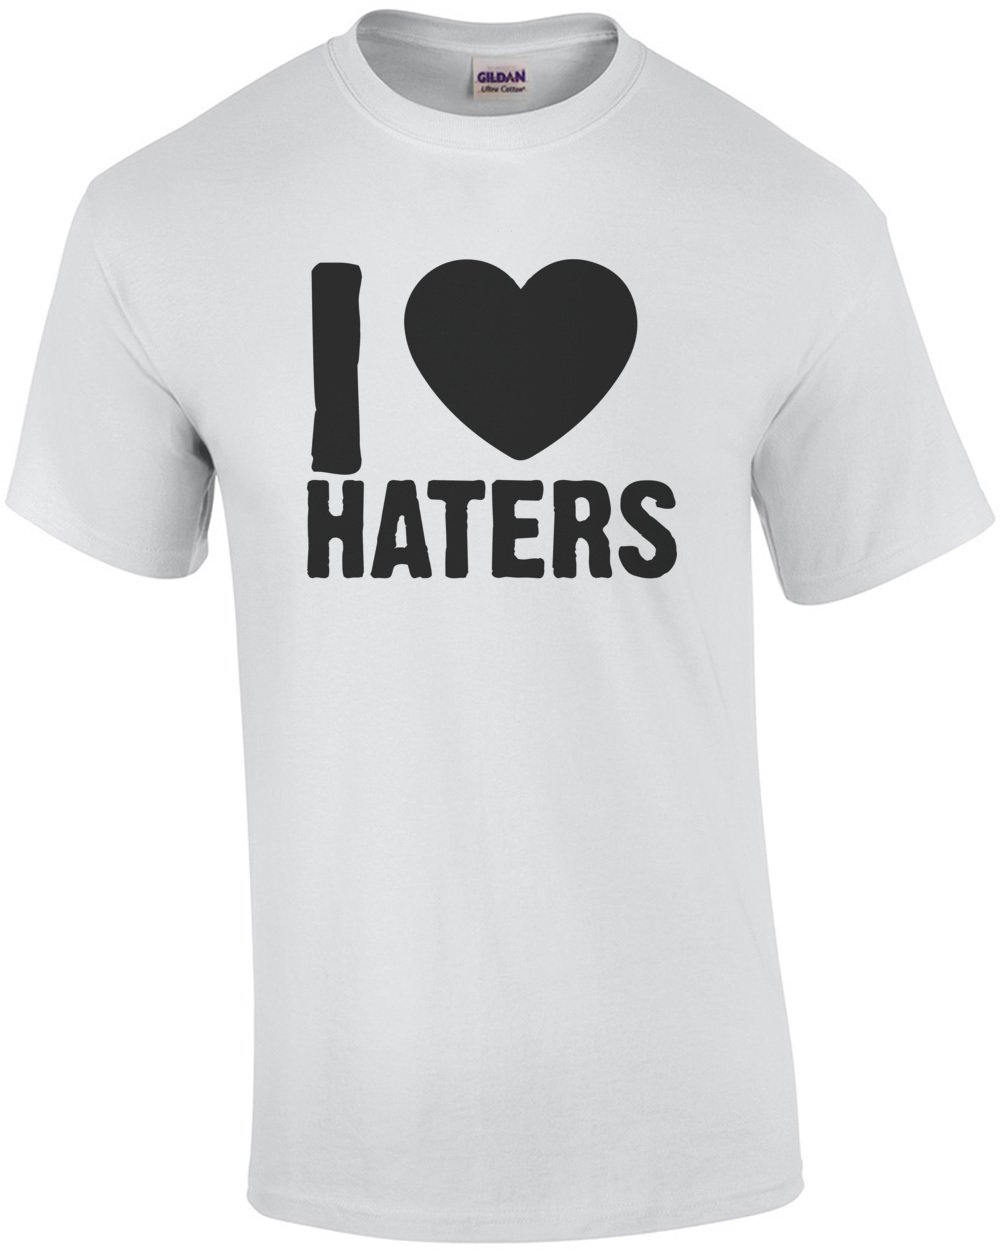 I <3 Haters